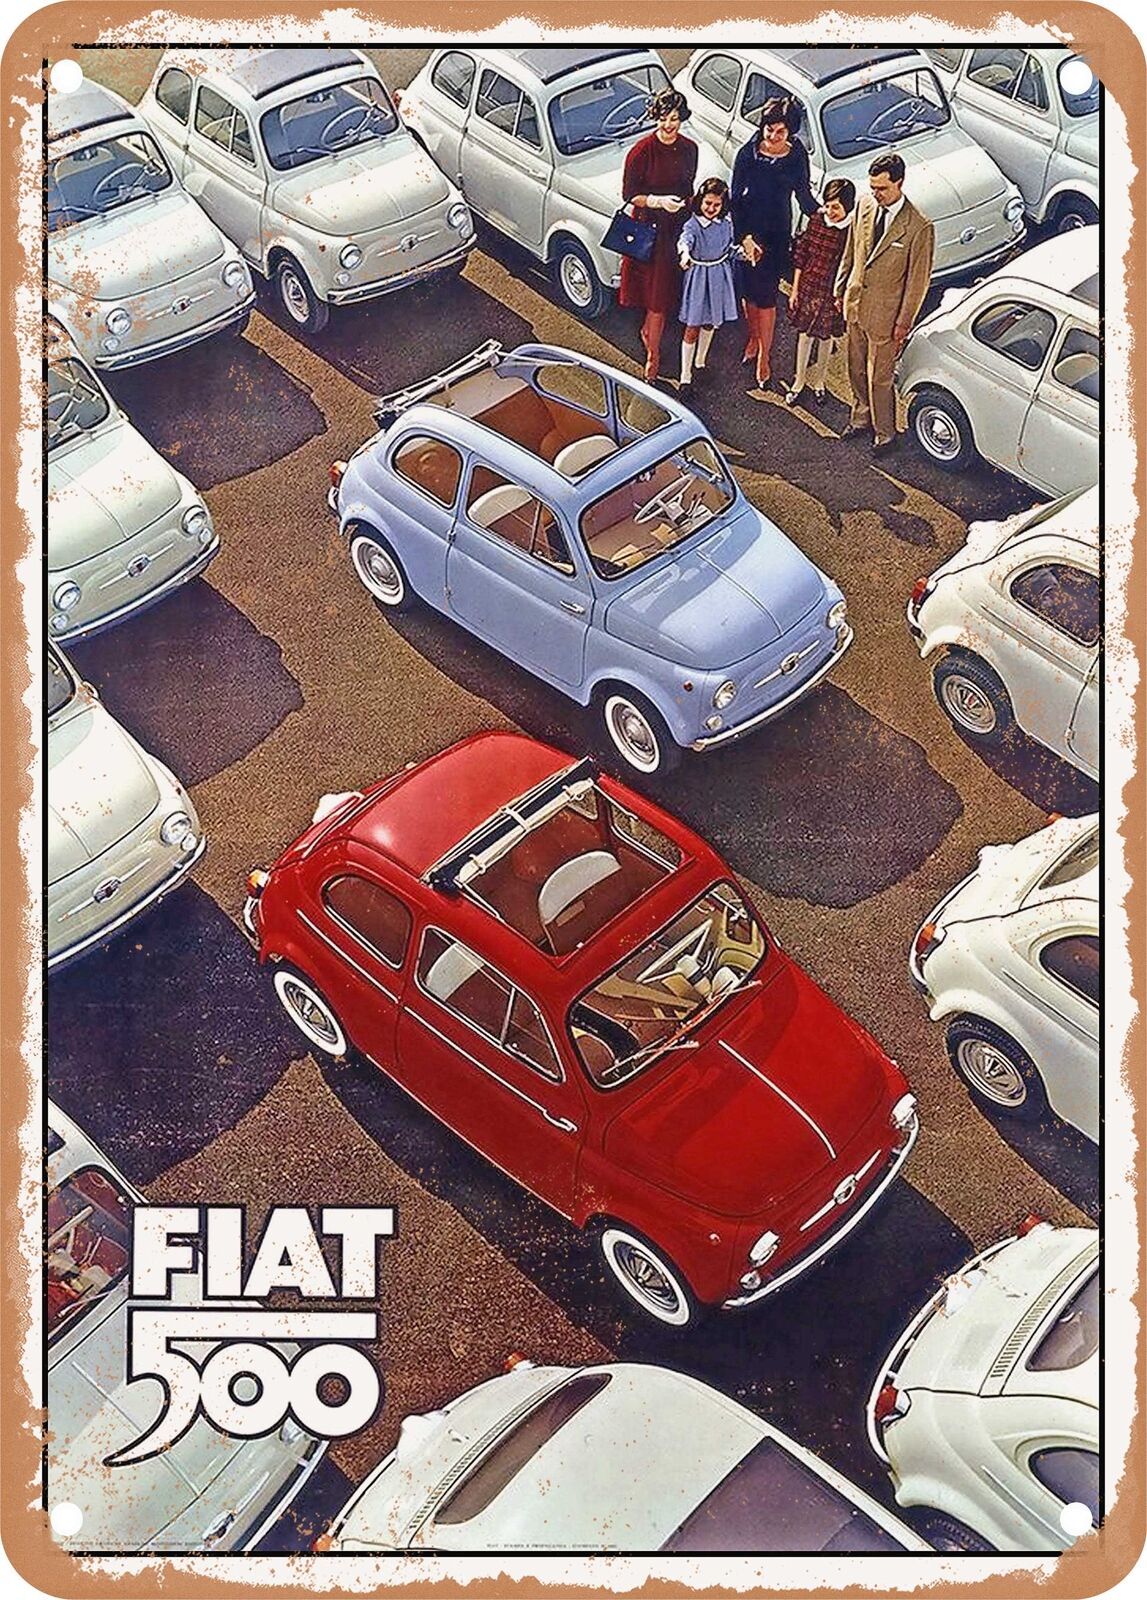 METAL SIGN - 1959 Fiat 500 Convertible Vintage Ad